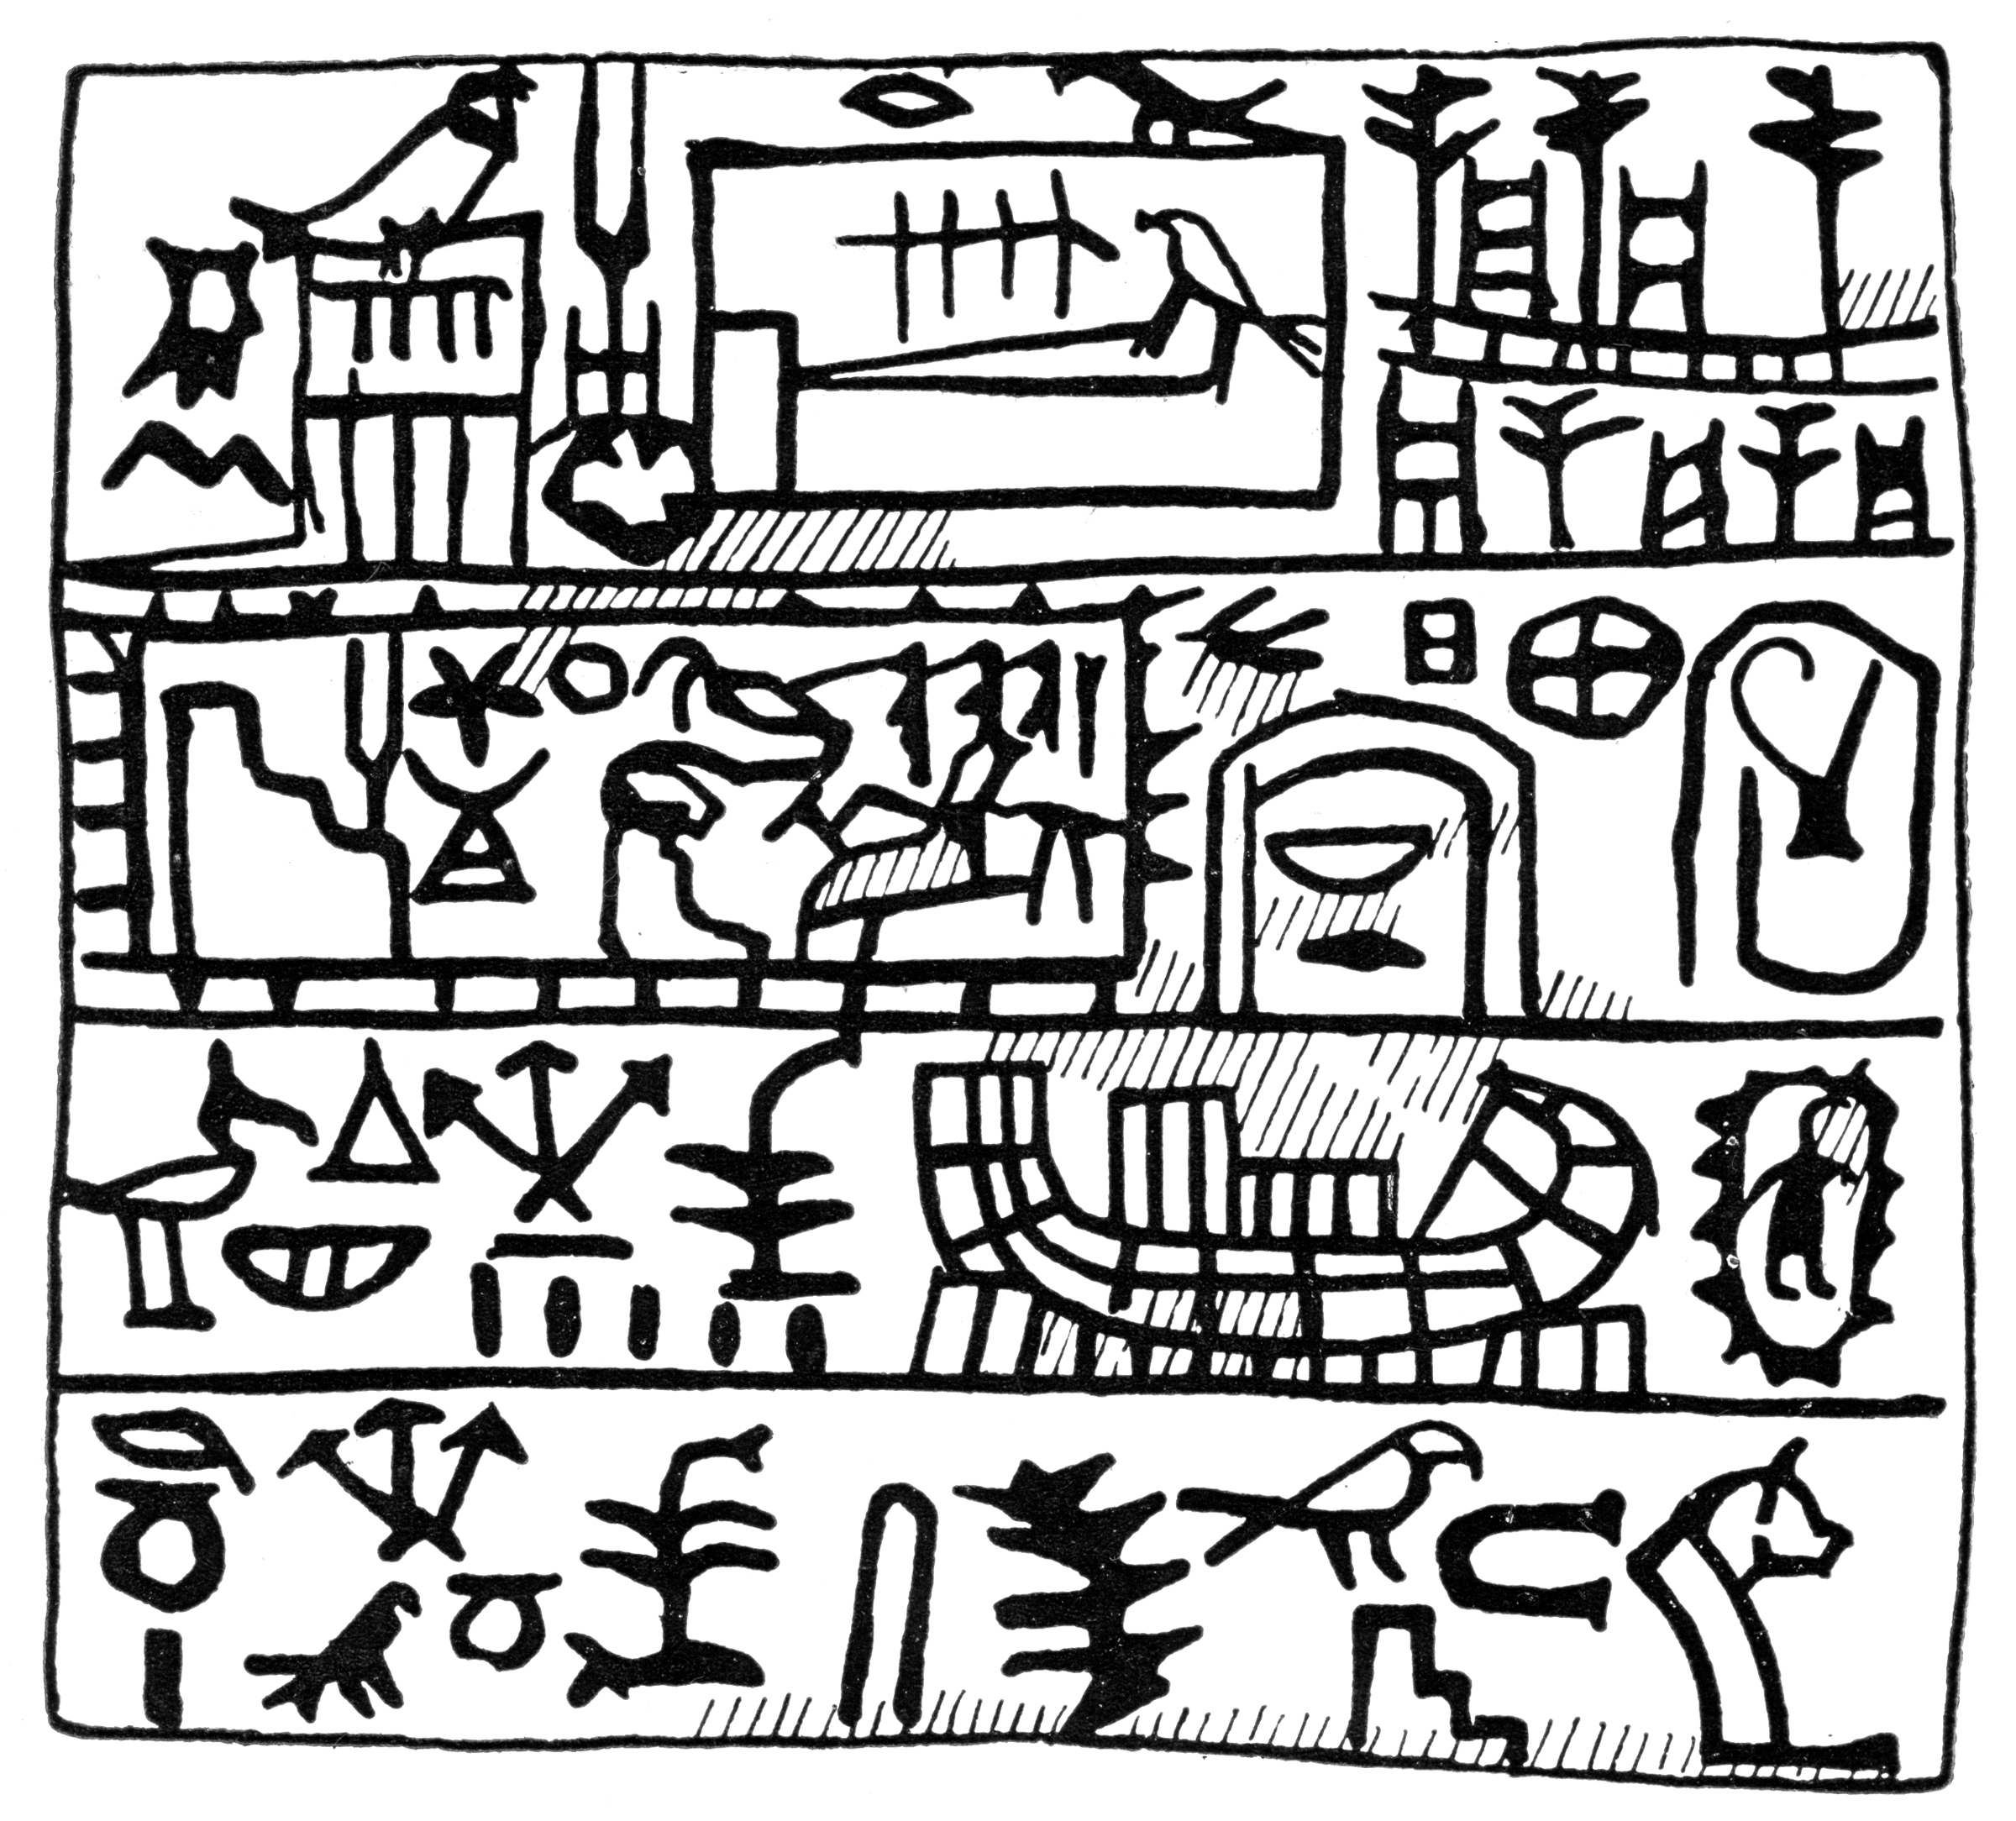 The Djer label from Abydos